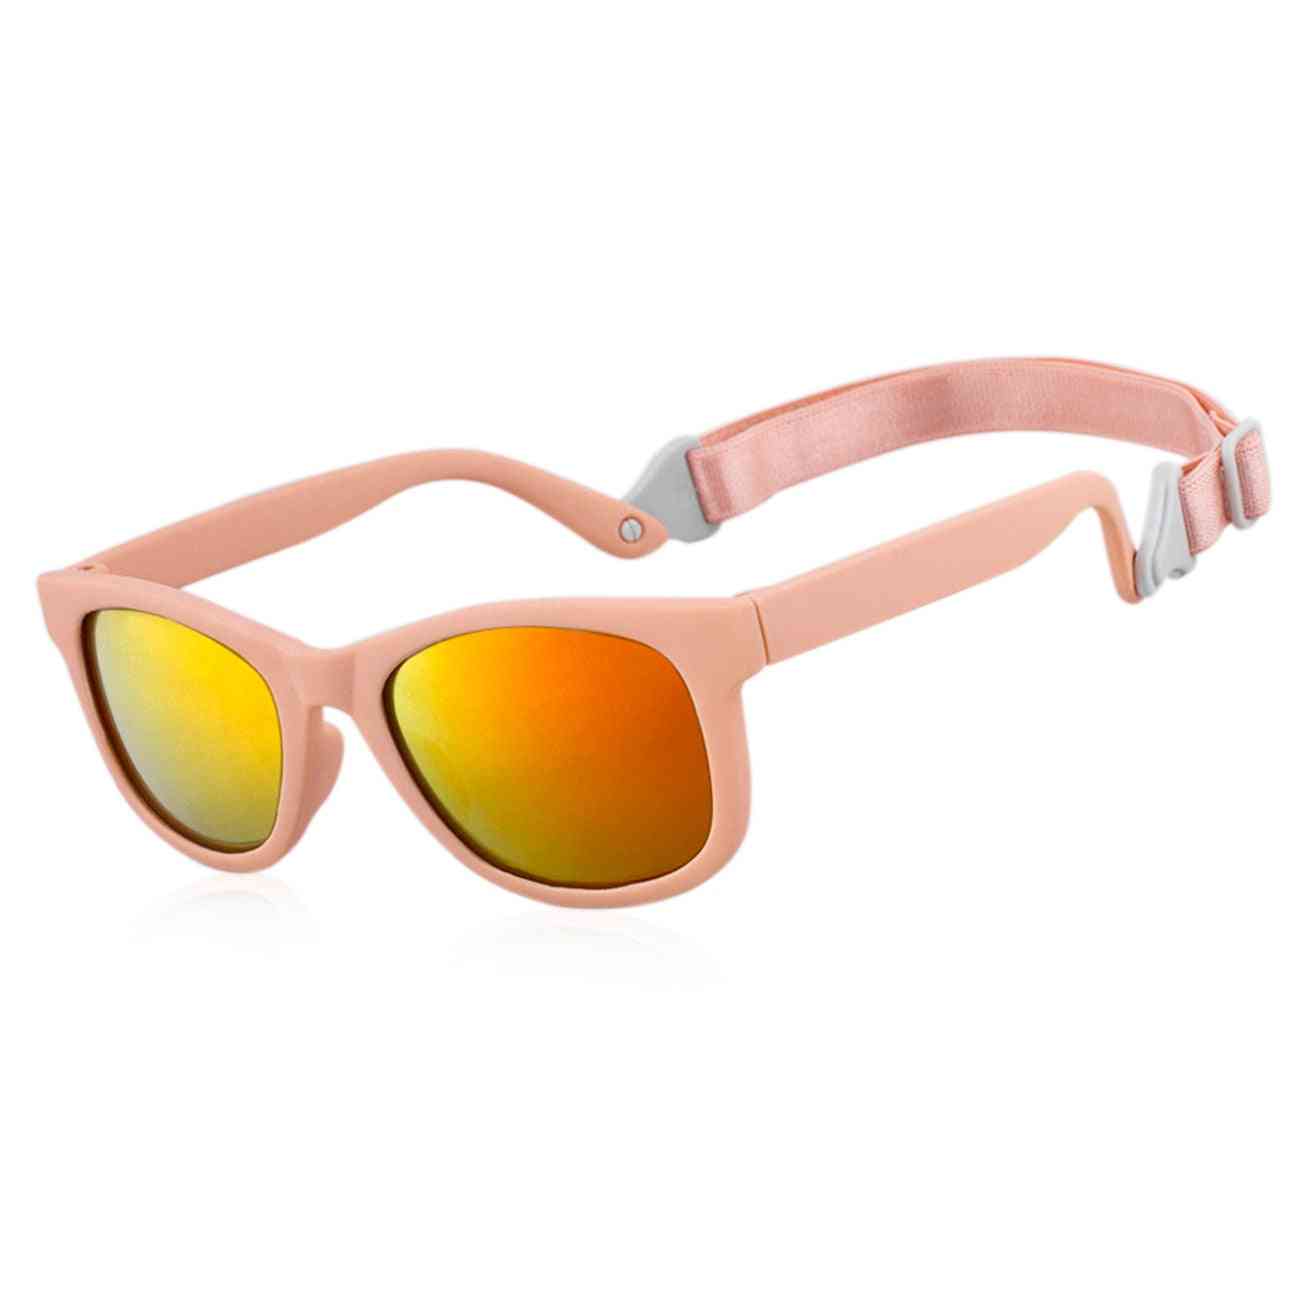 Baby Infant Cute Sunglasses With Adjustable Strap